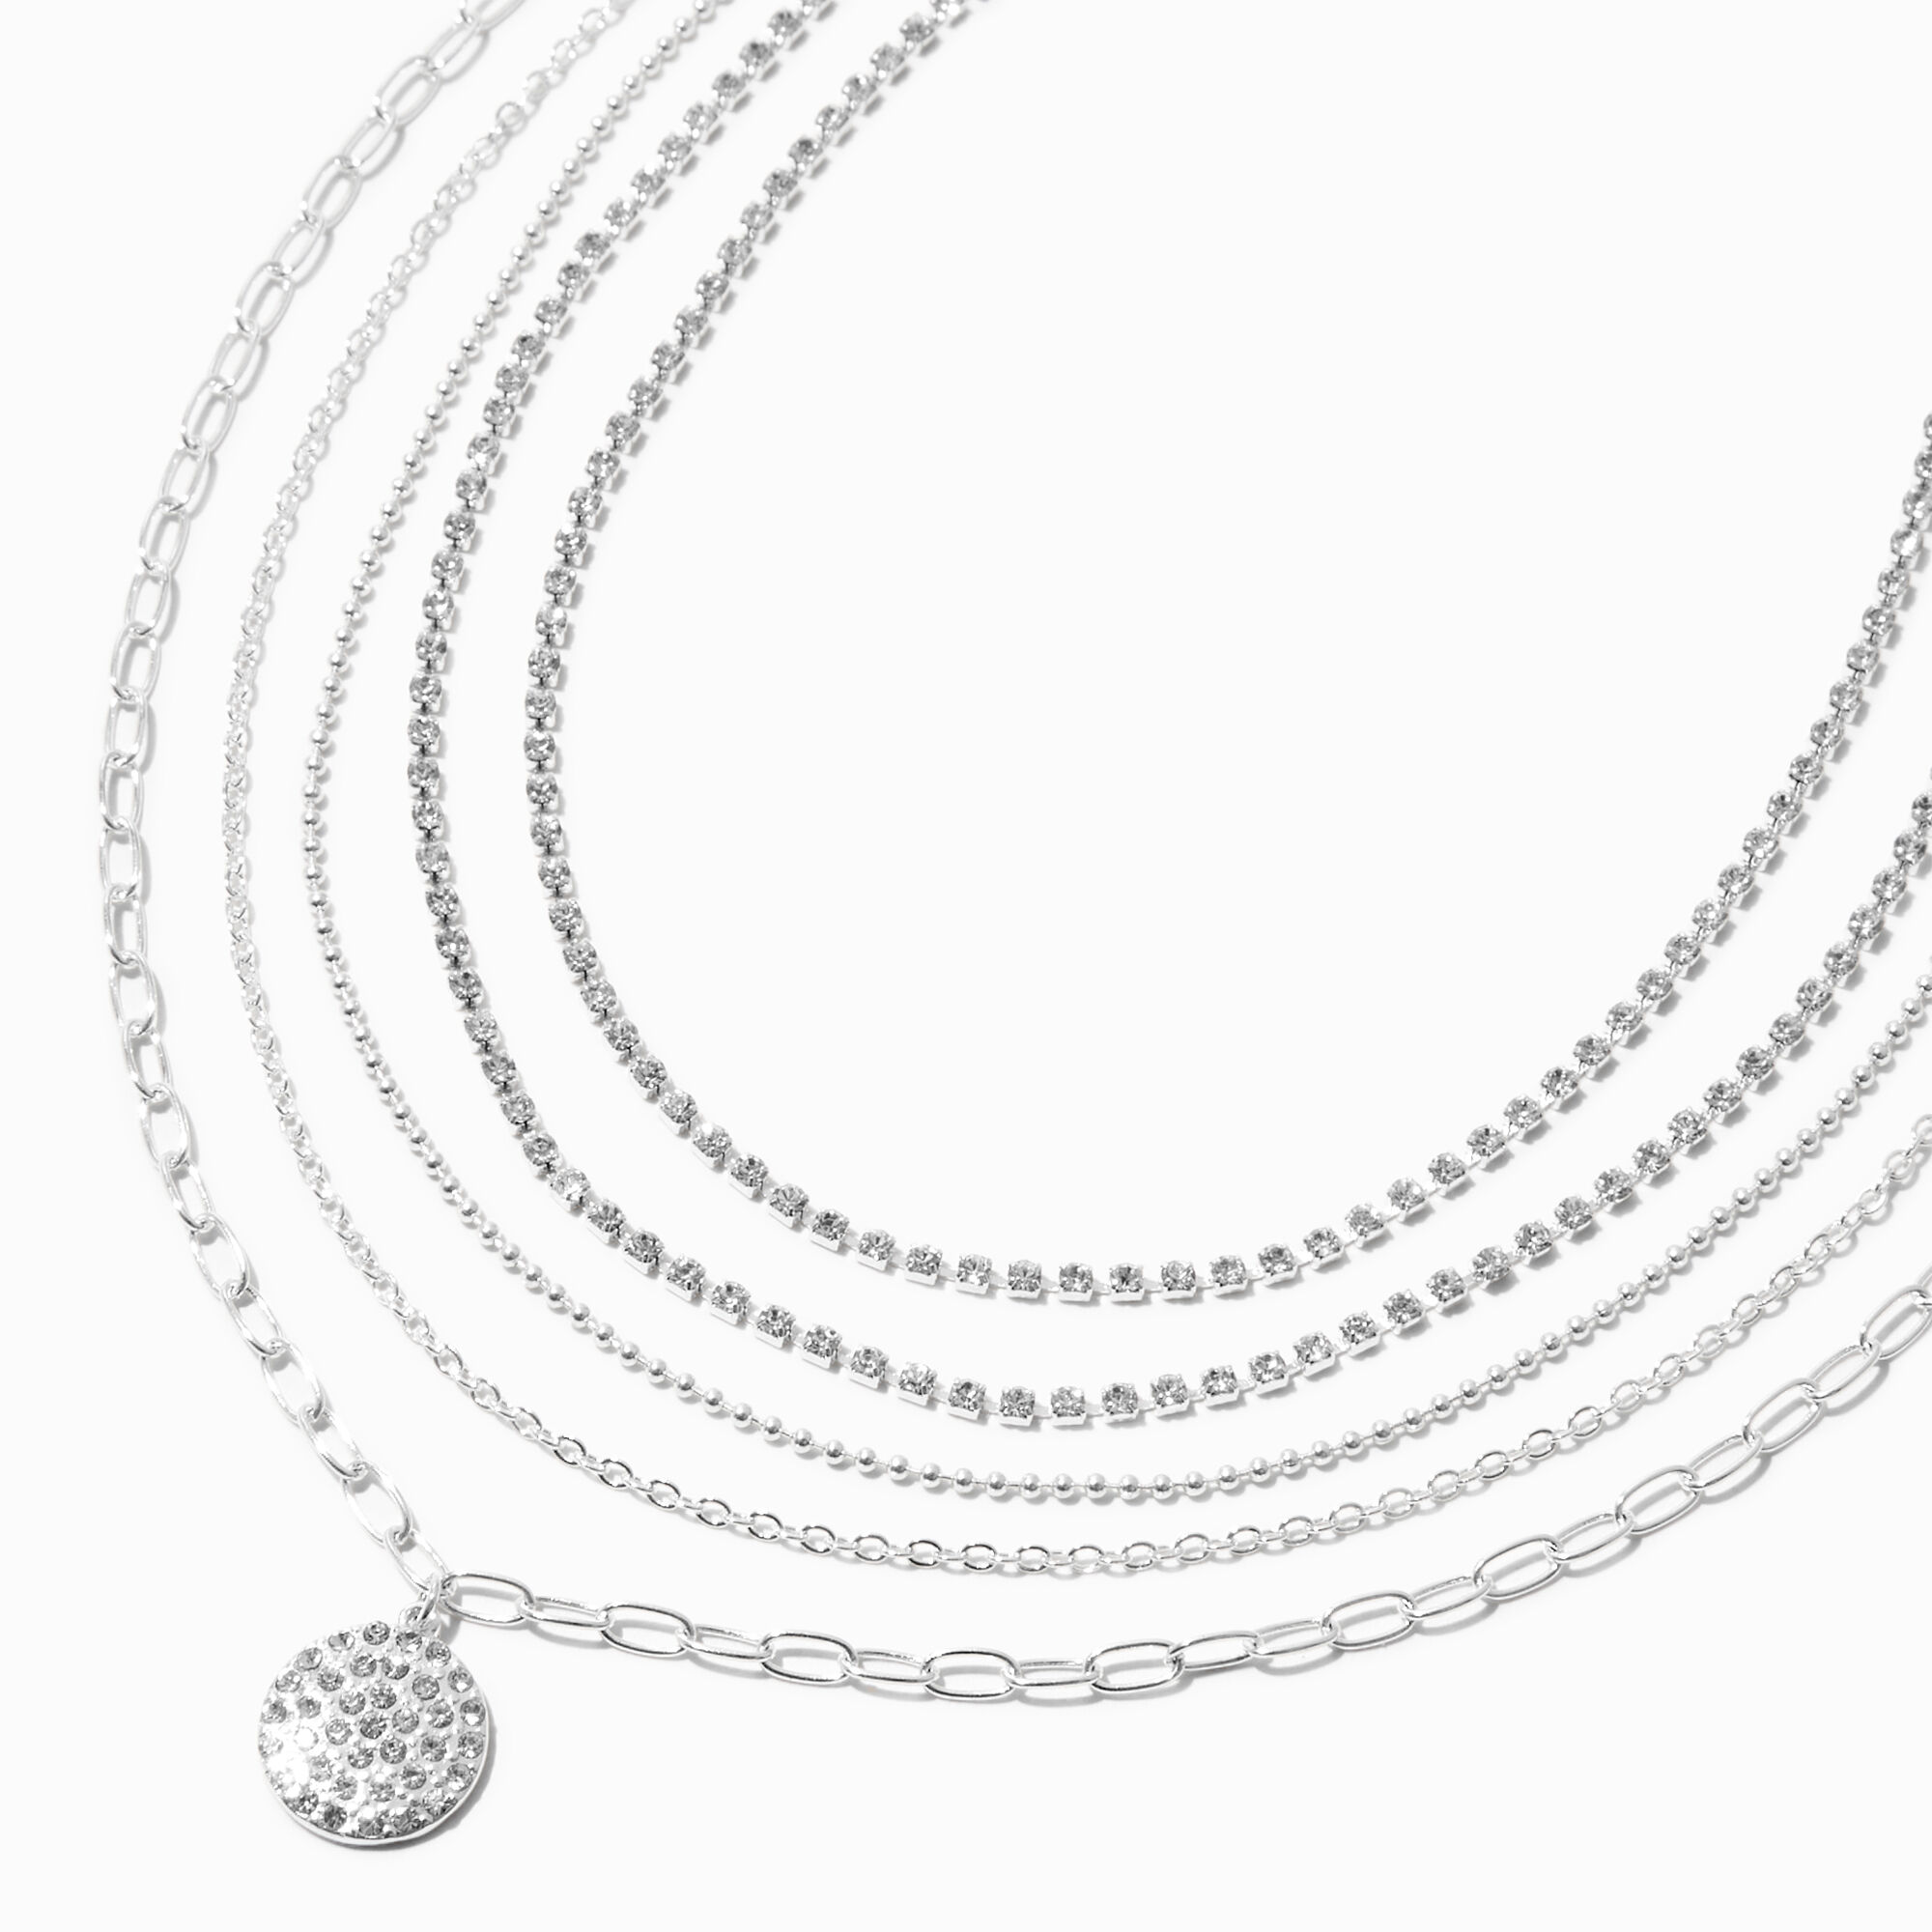 View Claires Tone Rhinestone Medallion Necklaces 5 Pack Silver information